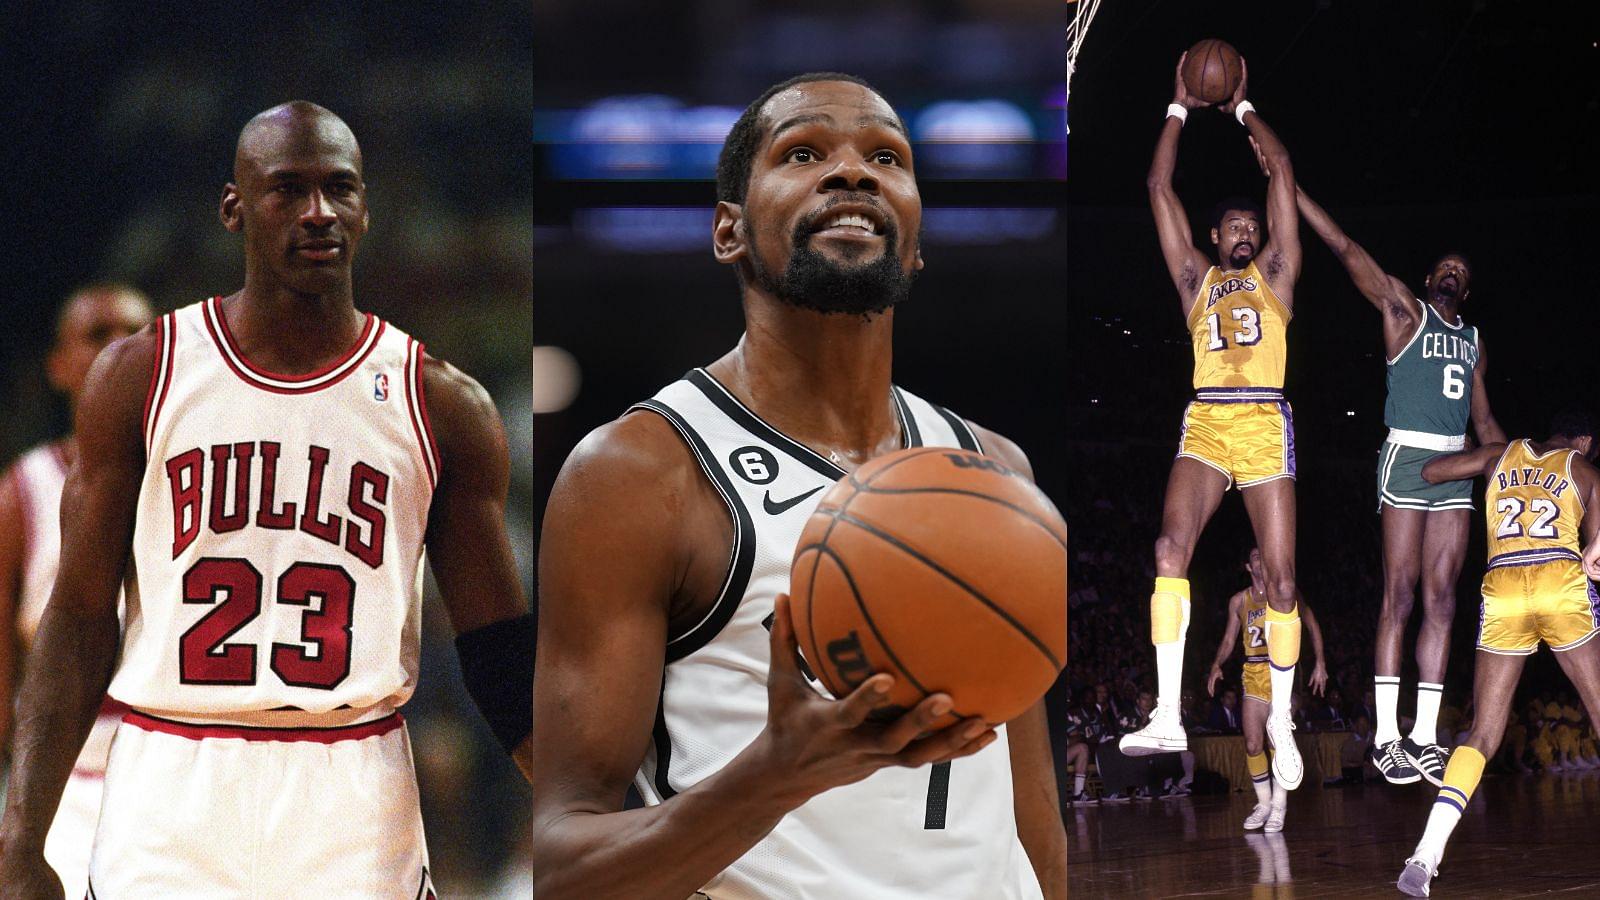 6ft 10’ Kevin Durant Equals Michael Jordan For Most 25-point Games to Start an NBA season, Still 64 Games Behind Another Legend